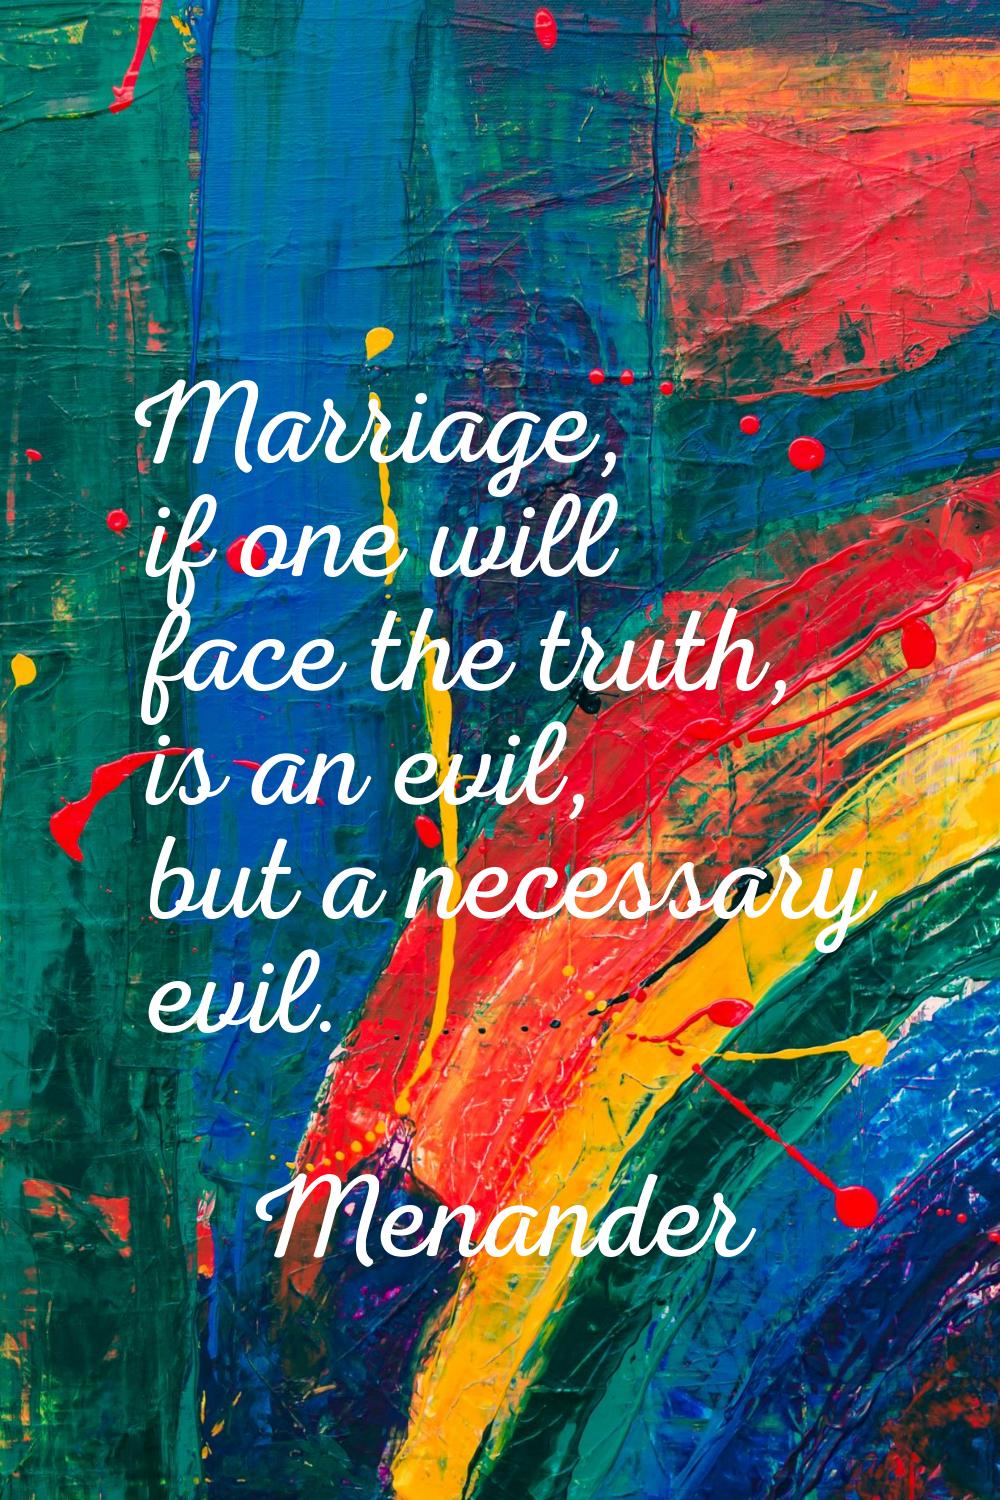 Marriage, if one will face the truth, is an evil, but a necessary evil.